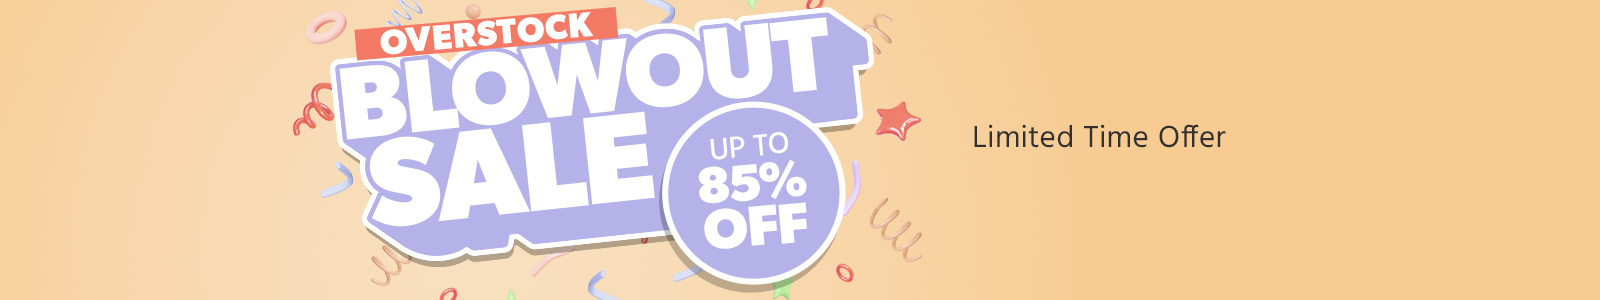 Blow Out Sale
Up to 80% Off
Limited Time Offer
Shop Now